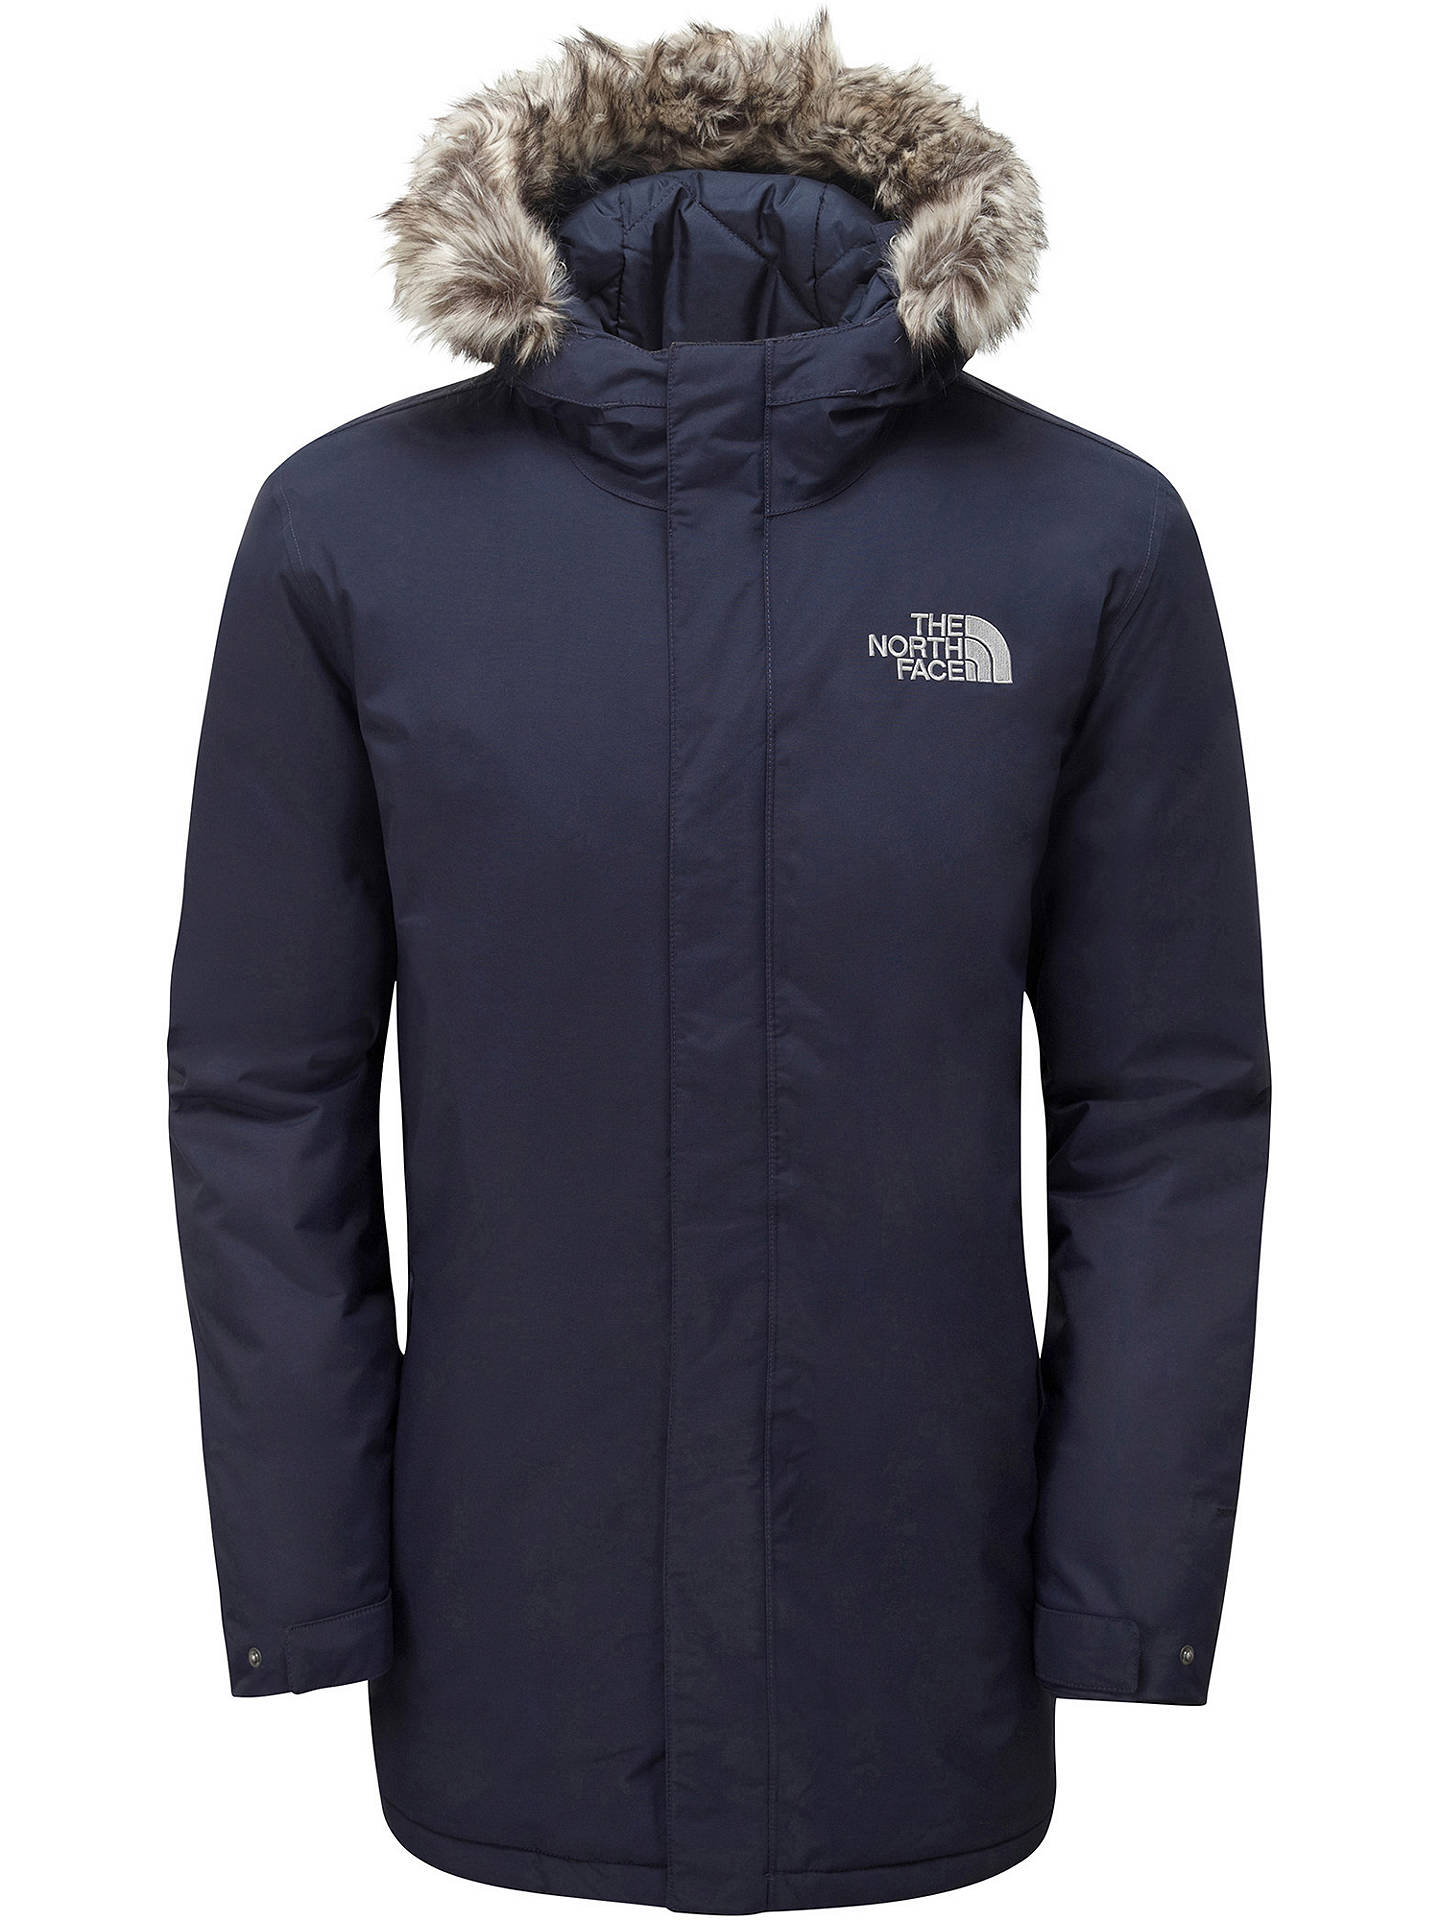 The North Face Zaneck Hooded Men's Jacket, Blue at John Lewis & Partners